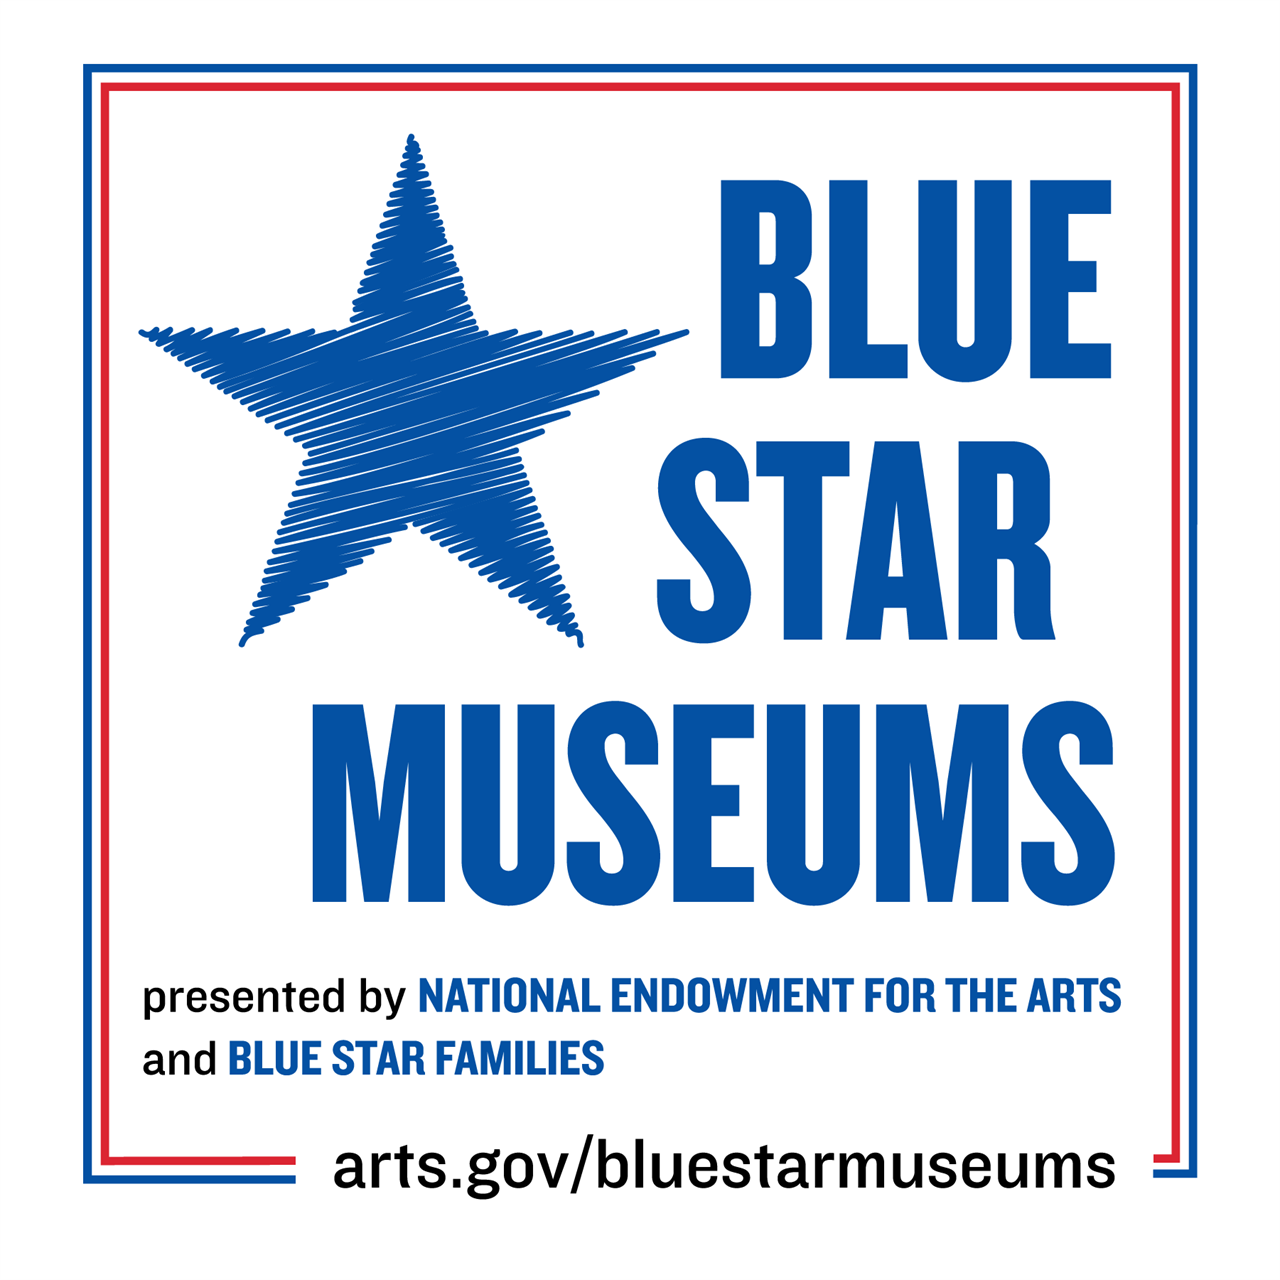 Logo for Blue Star Museums. Text underneath: "presented by NATIONAL ENDOWMENT FOR THE ARTS and BLUE STAR FAMILIES arts.gov/bluestarmuseums"